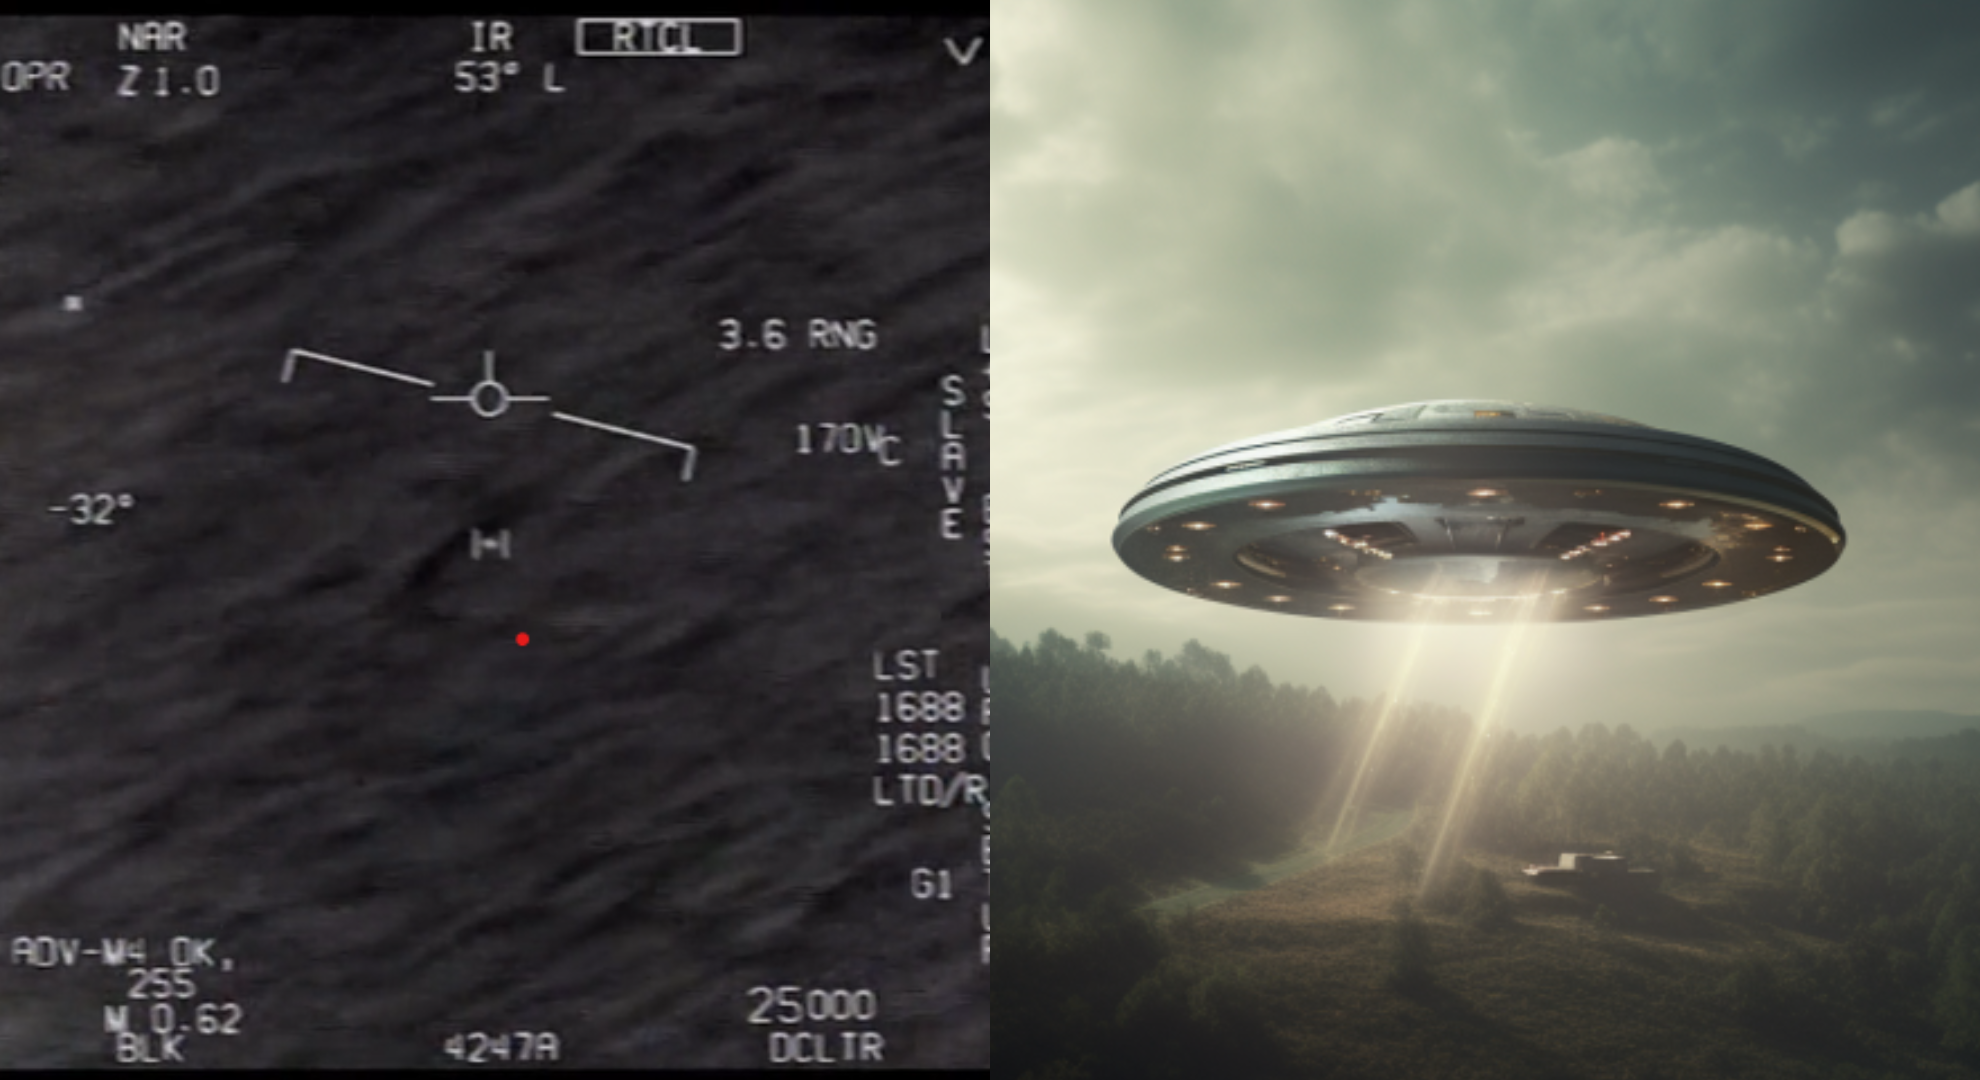 VIDEO OF ‘GOFAST UFO’ FROM 2015 ‘ROTATING’ IN SKY RESURFACES AMID NASA REPORT - cover